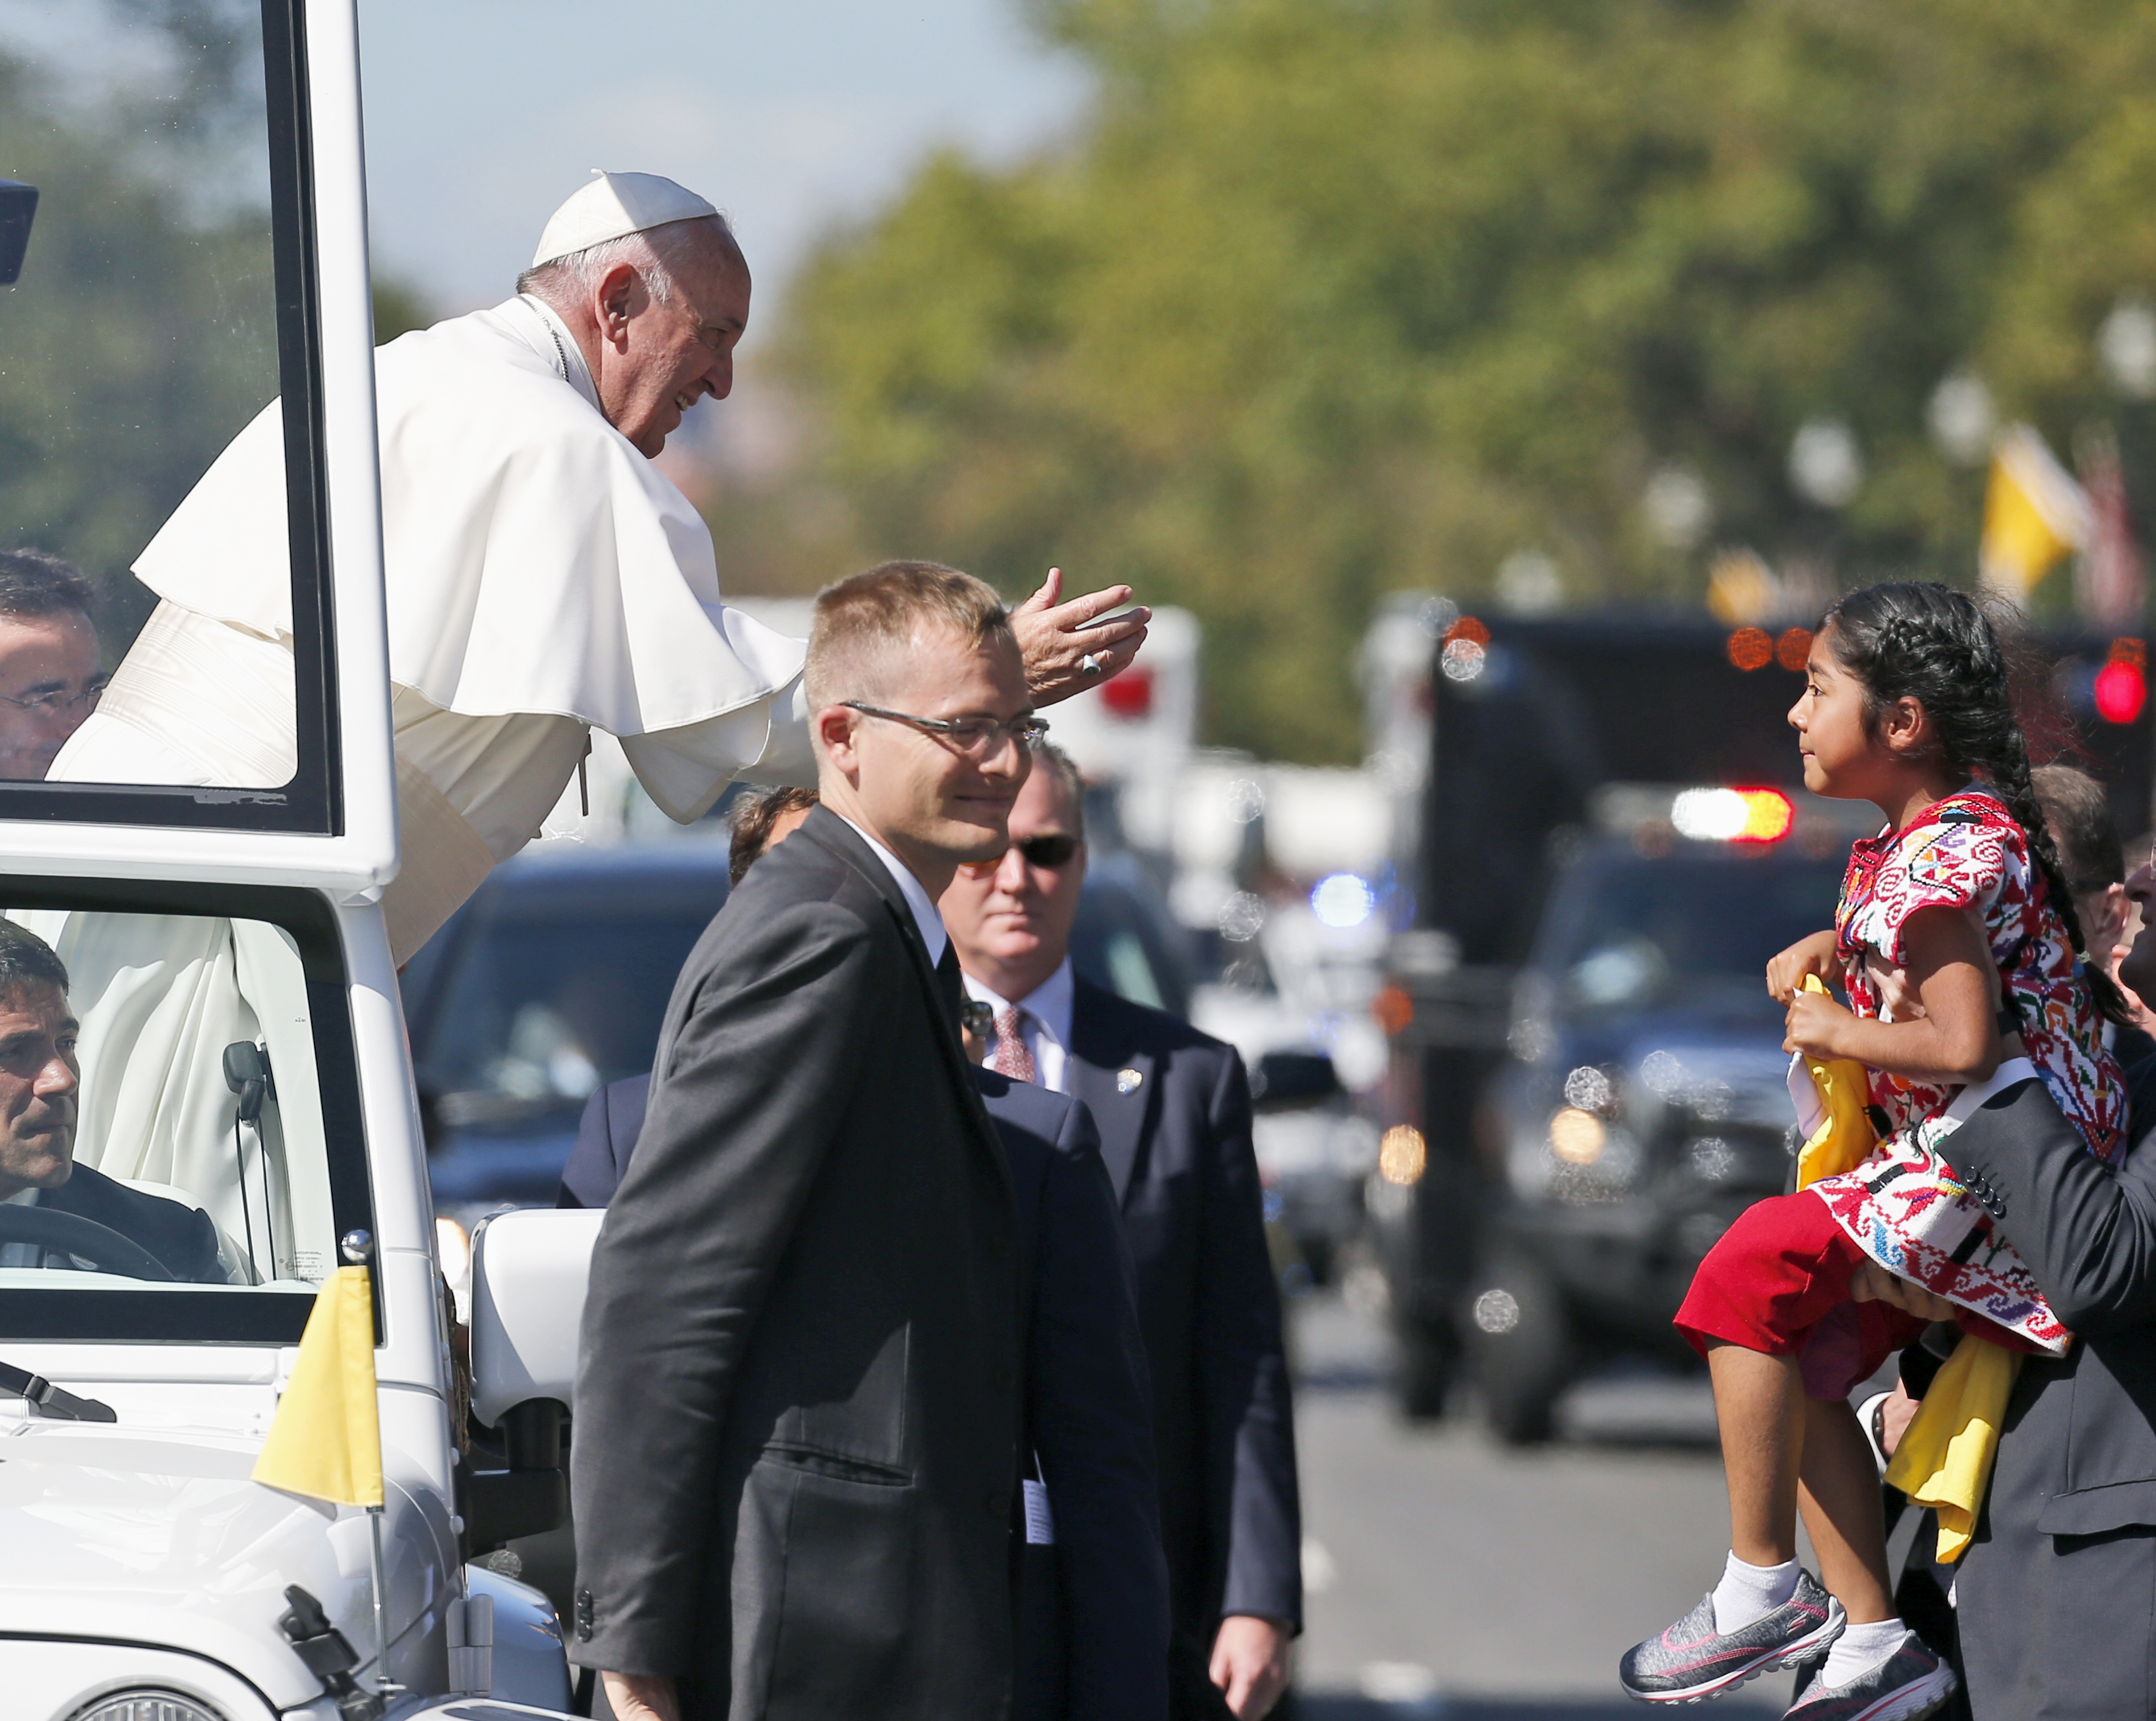 Pope Francis reaches to give a blessing to Sophie Cruz, 5, from suburban Los Angeles, during a parade in Washington on Sept. 23, 2015. (Alex Brandon—AP)